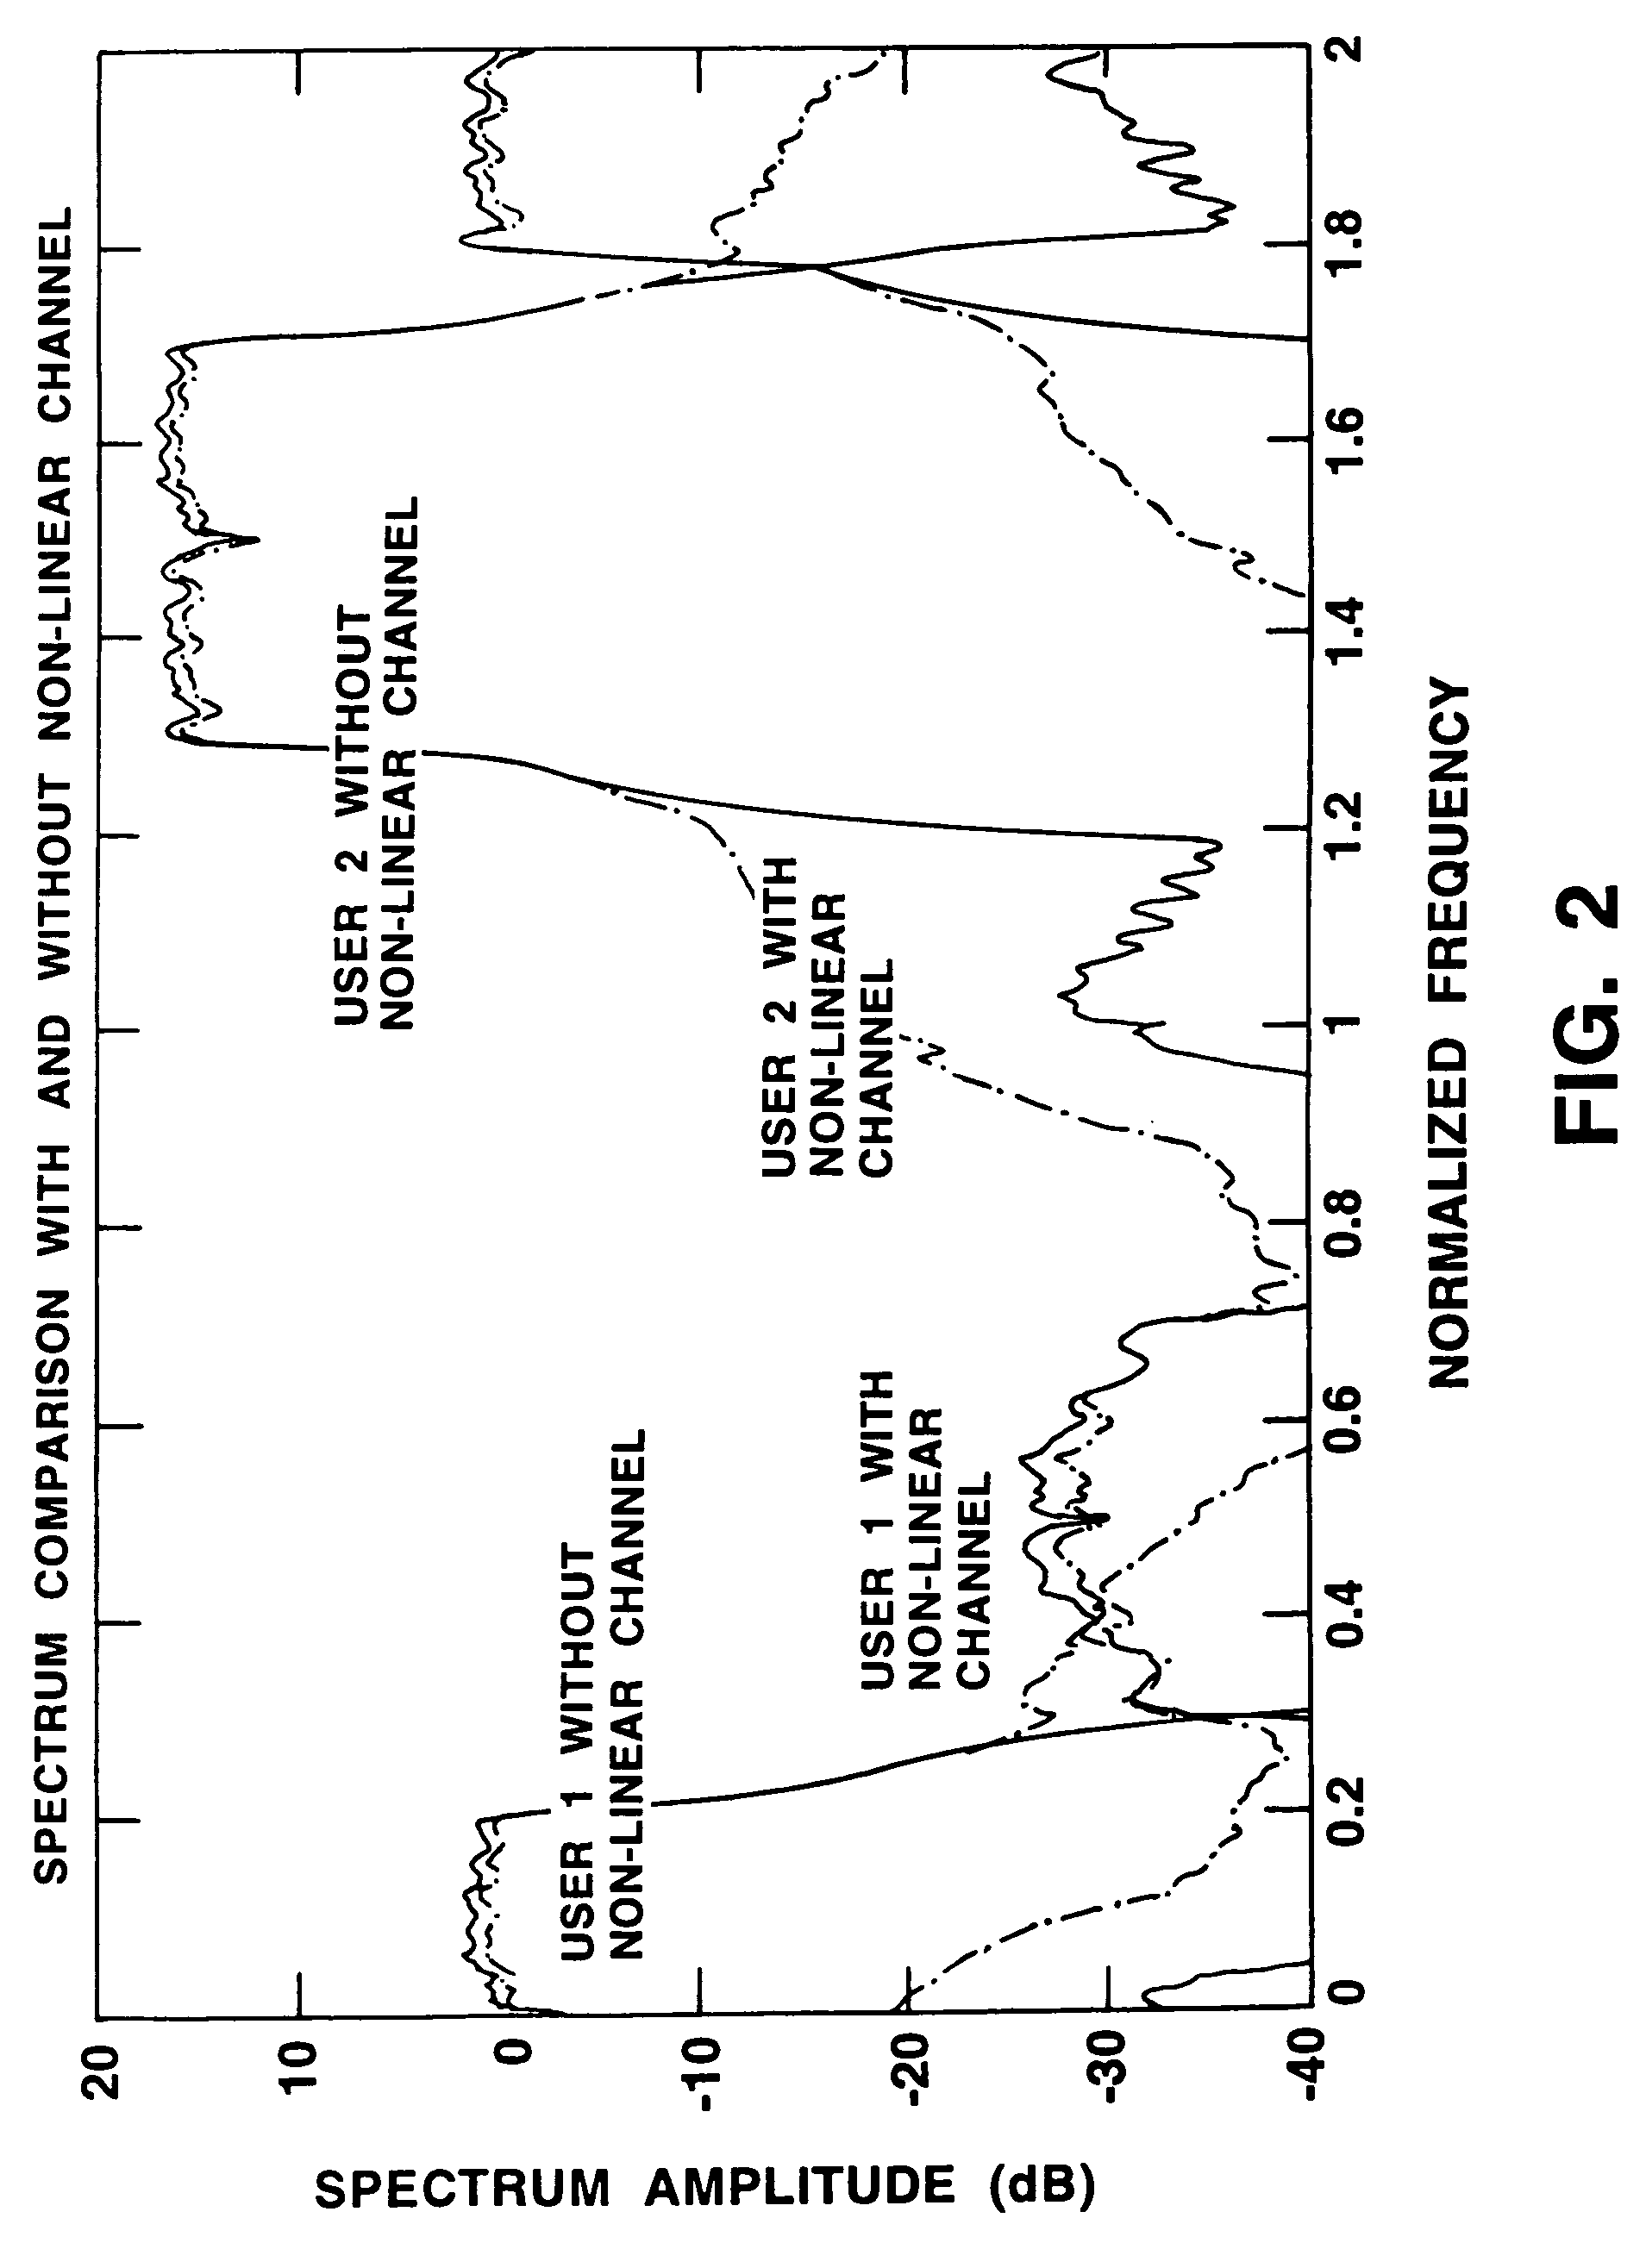 Method and apparatus for side-lobe cancellation in wideband radio systems